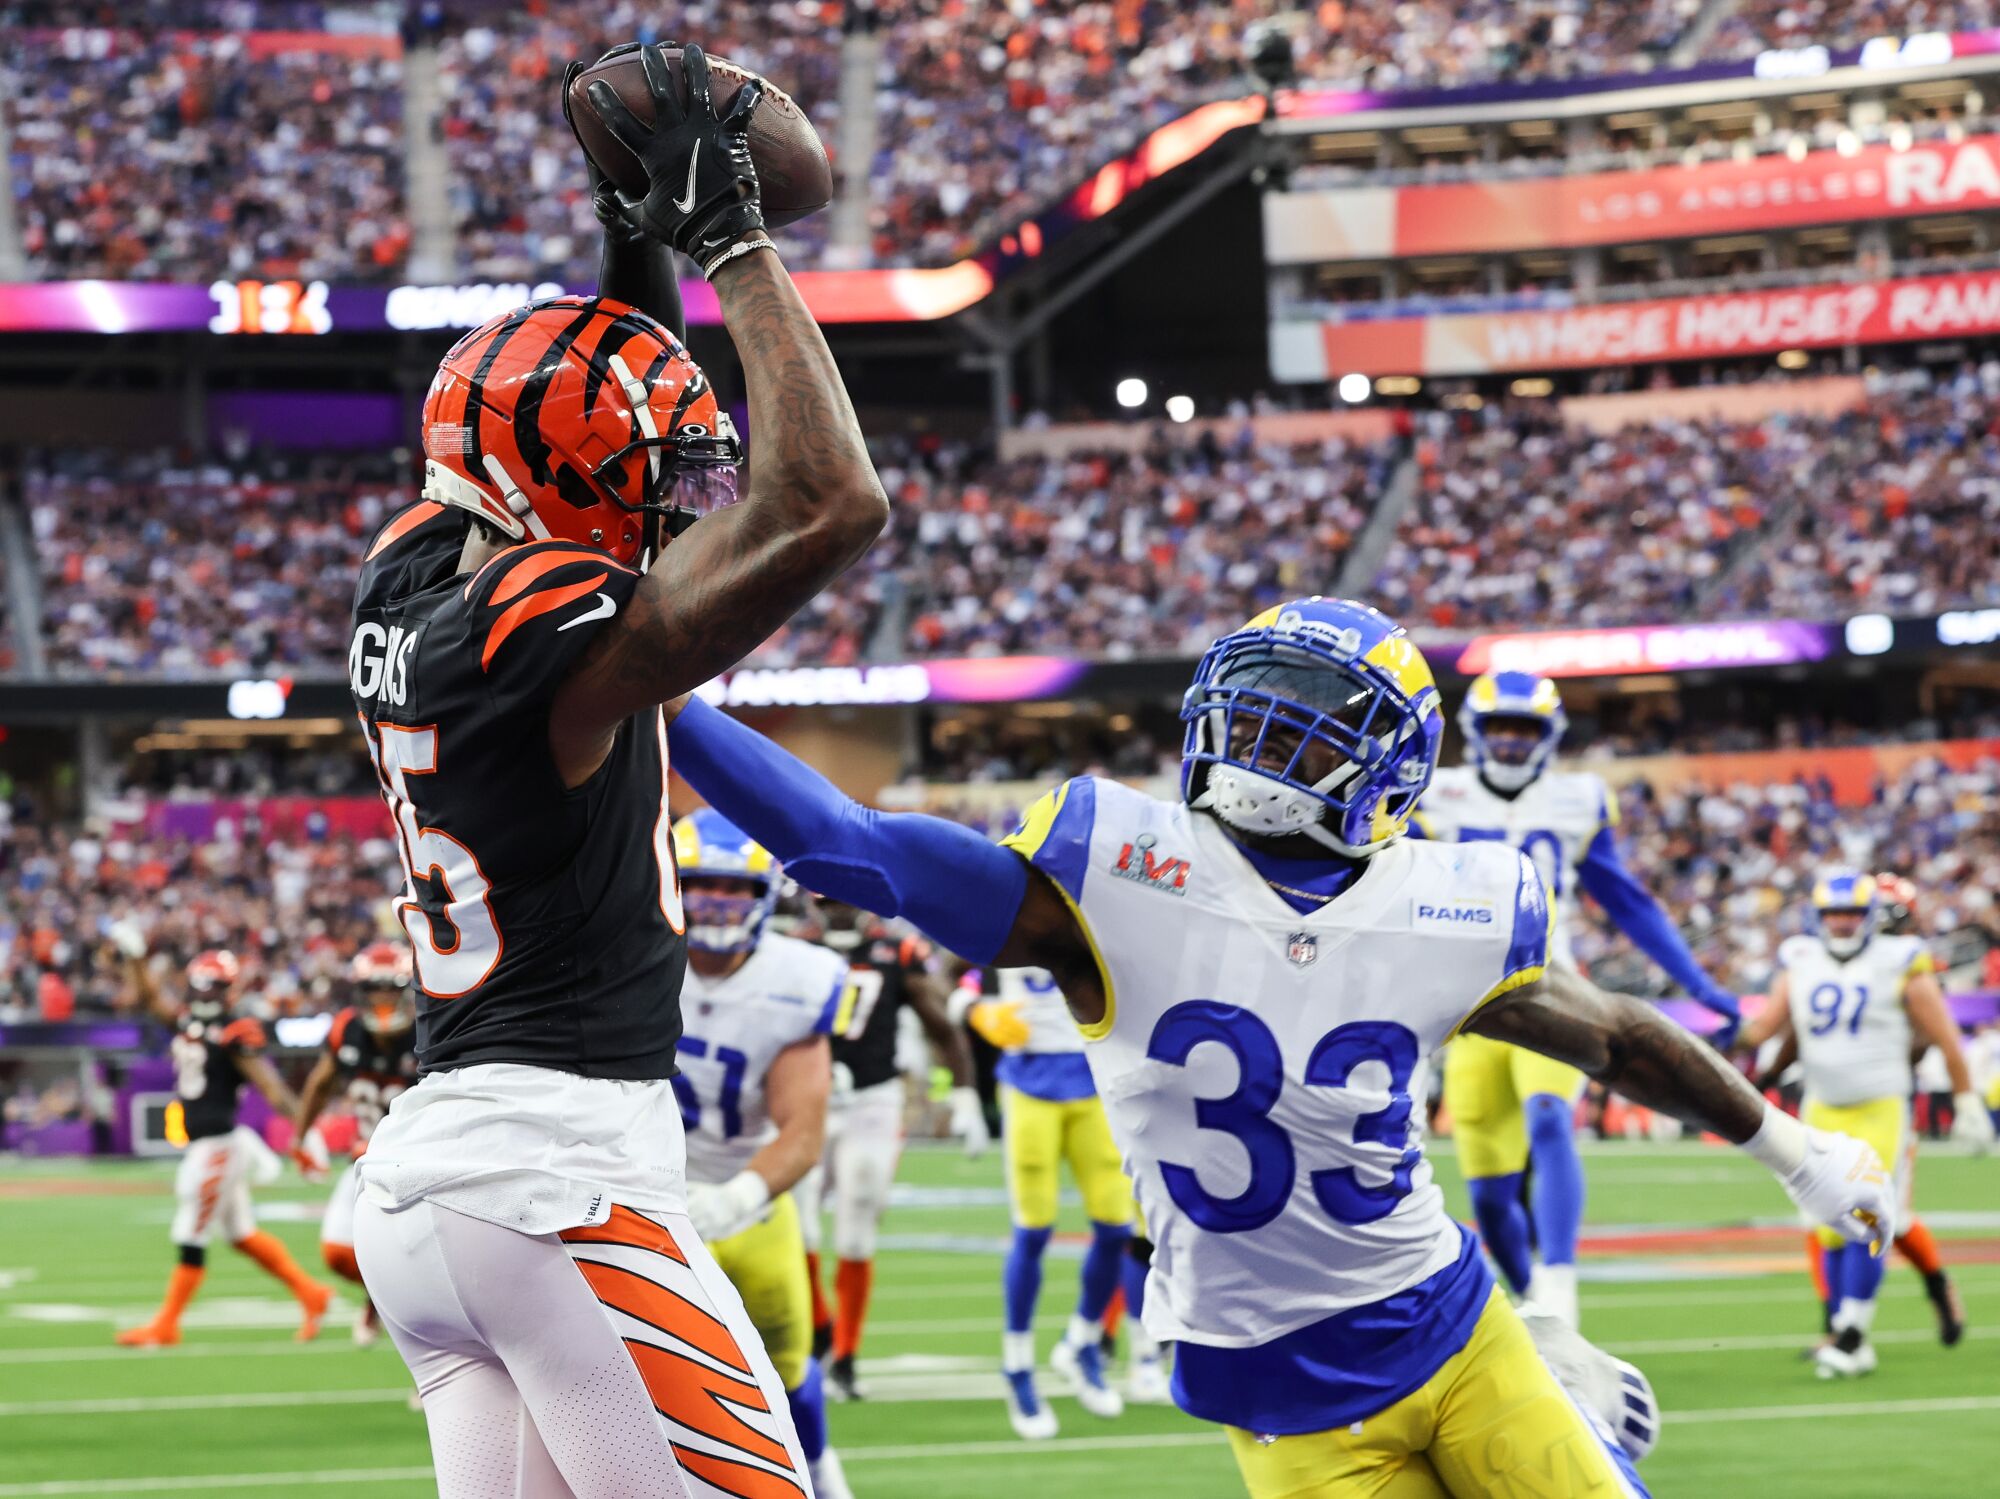 Bengals wide receiver Tee Higgins catches a touchdown pass in the second quarter.